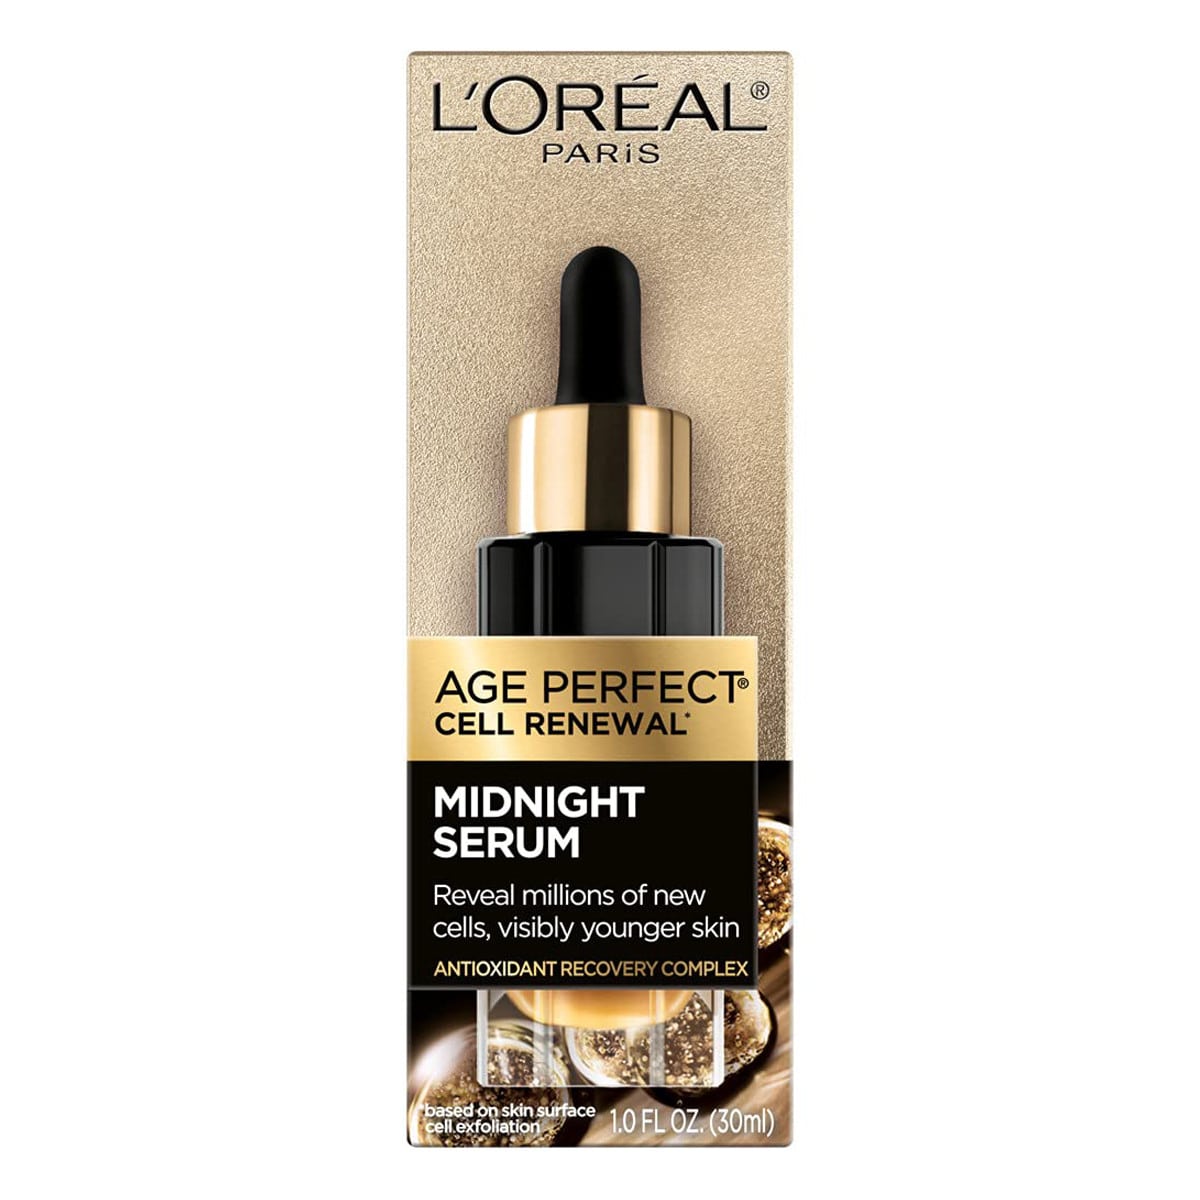 L'Oreal Paris Age Perfect Cell Renewal Midnight Anti-Aging Face Serum in package